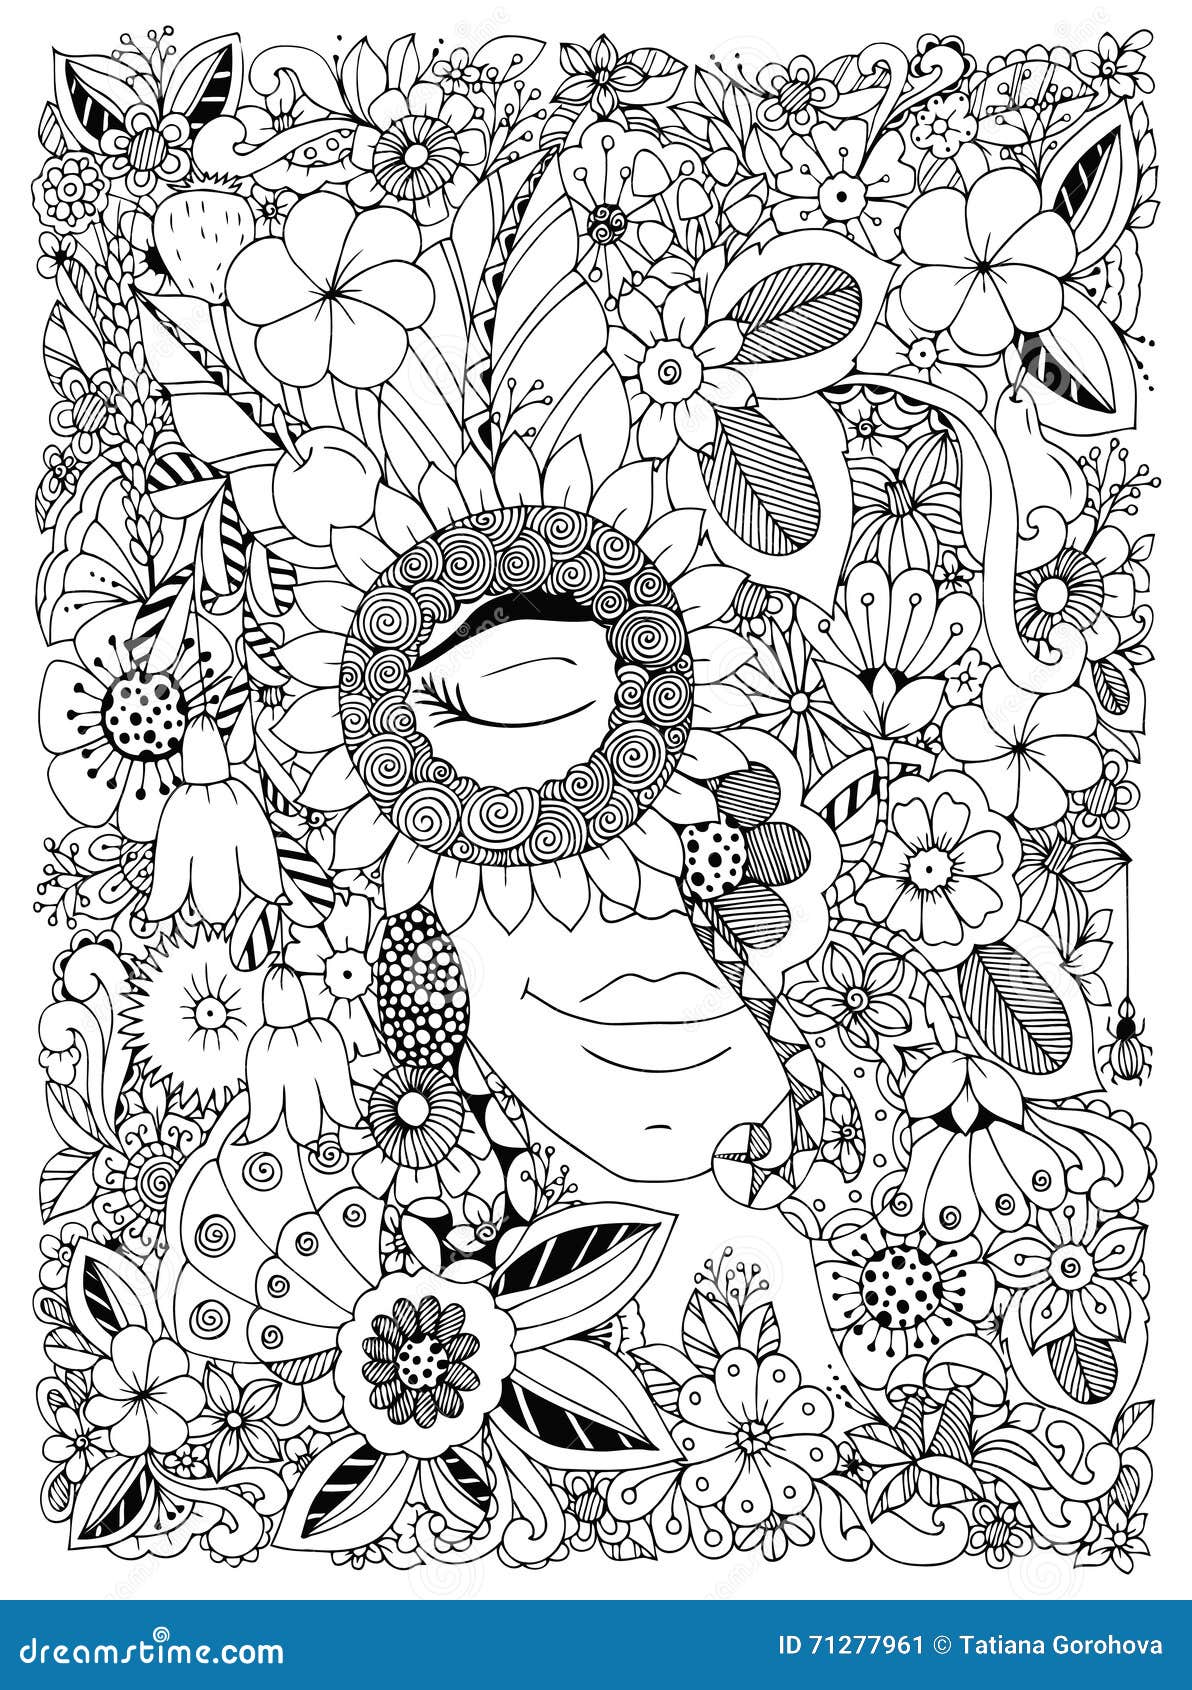 Zen Coloring Books: Flowers floral and Doodle Design Book For Girls 2017  (Cute Kids Coloring Books Ages 2-4, 4-8, 9-12)